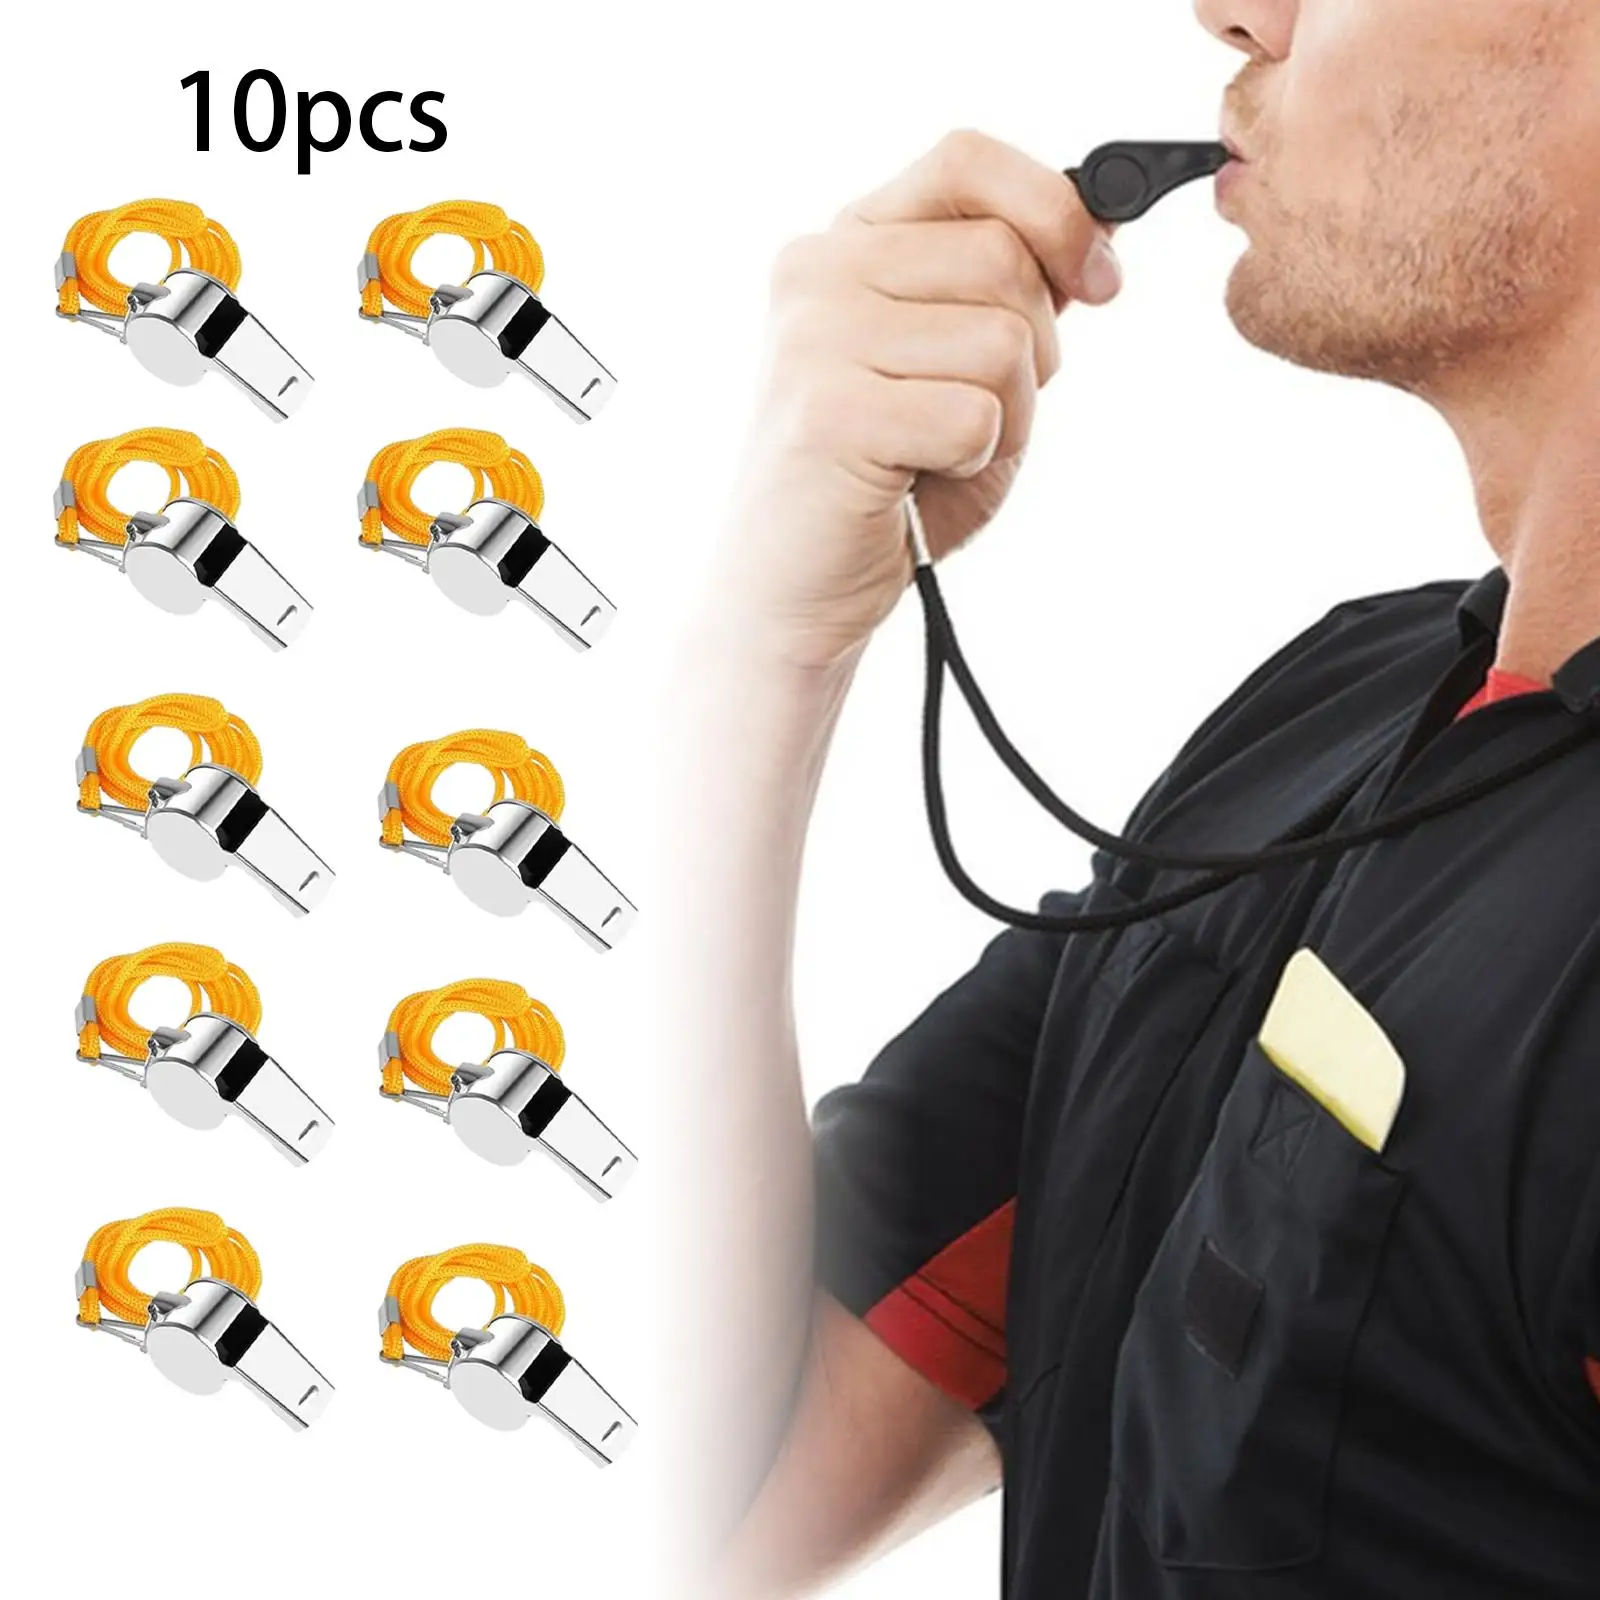 

10Pcs Sports Whistles for Adults Super Loud Metal Whistle with Lanyard for Basketball Volleyball Dog Training Emergency Survival